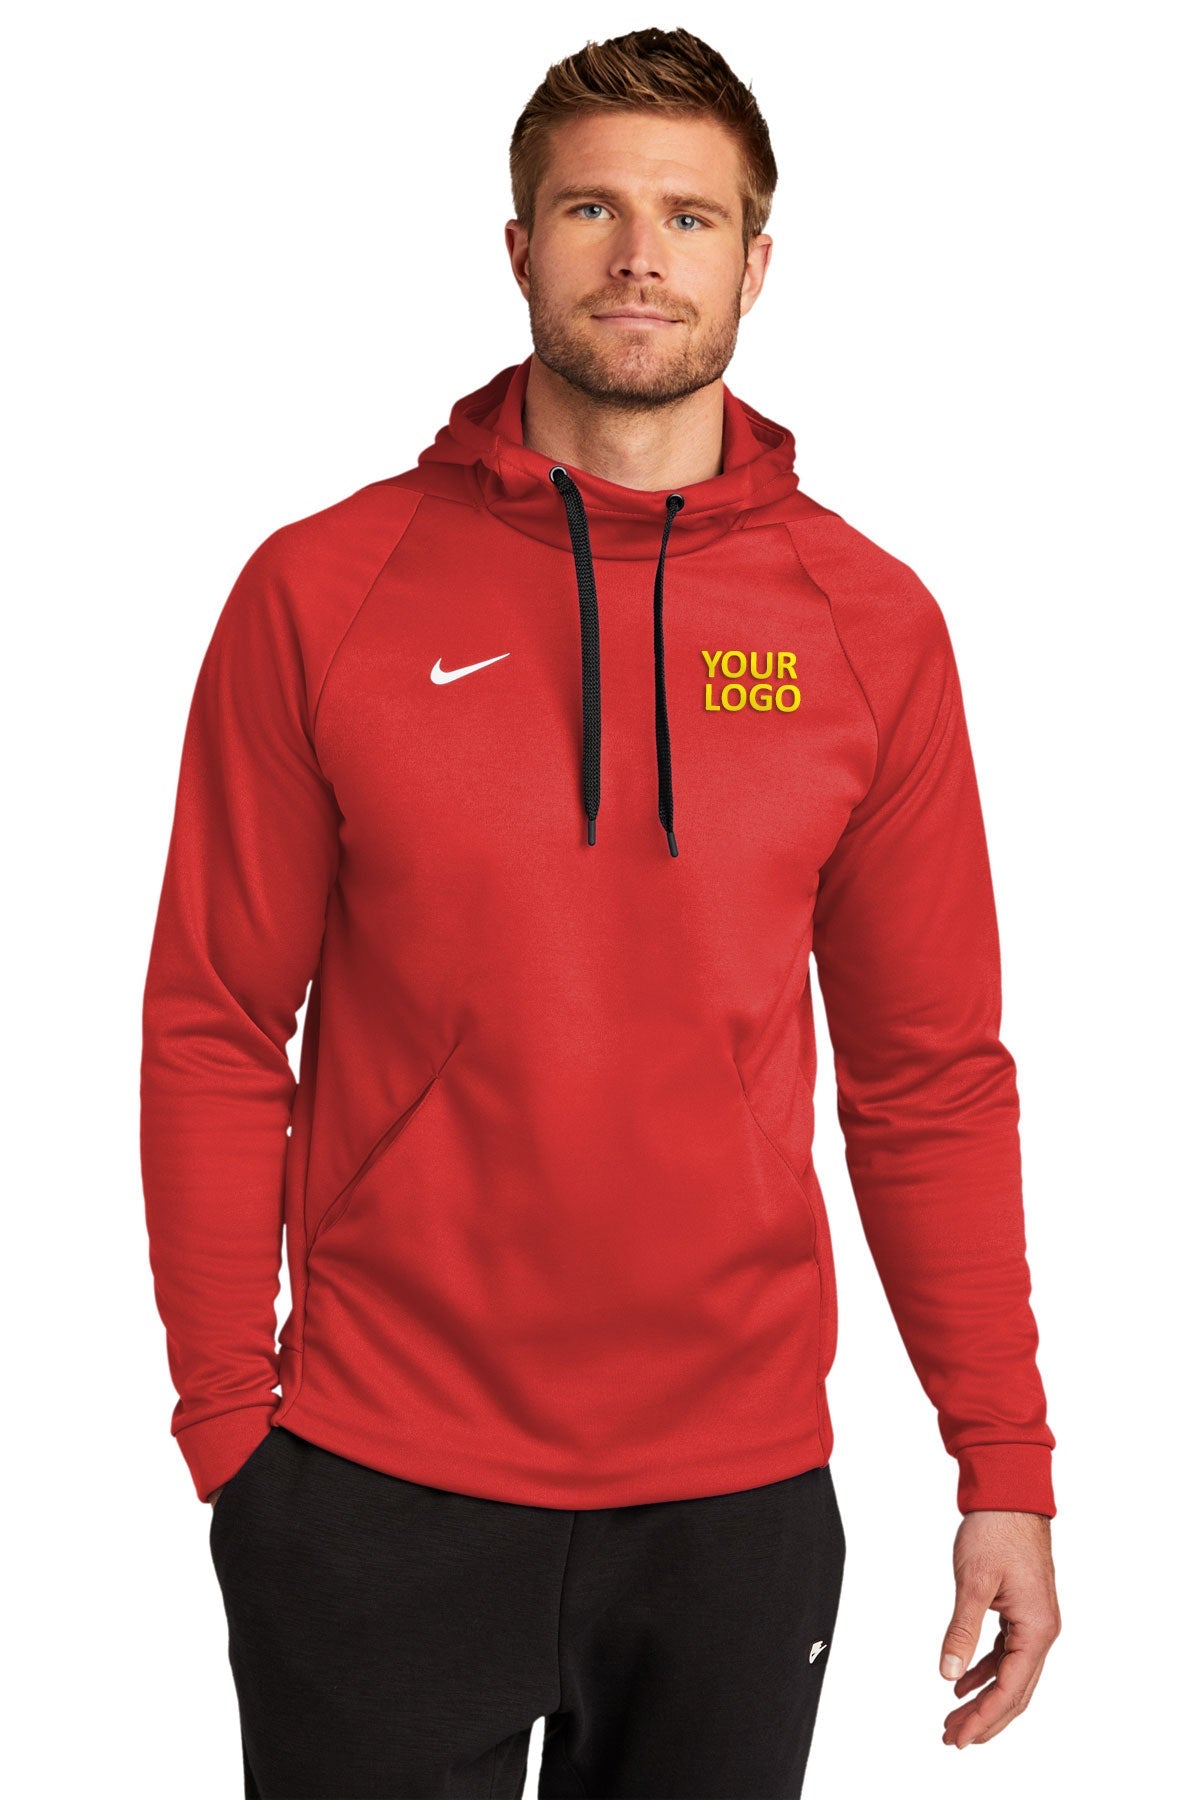 Nike Pockets Athletic Sweatsuits for Women